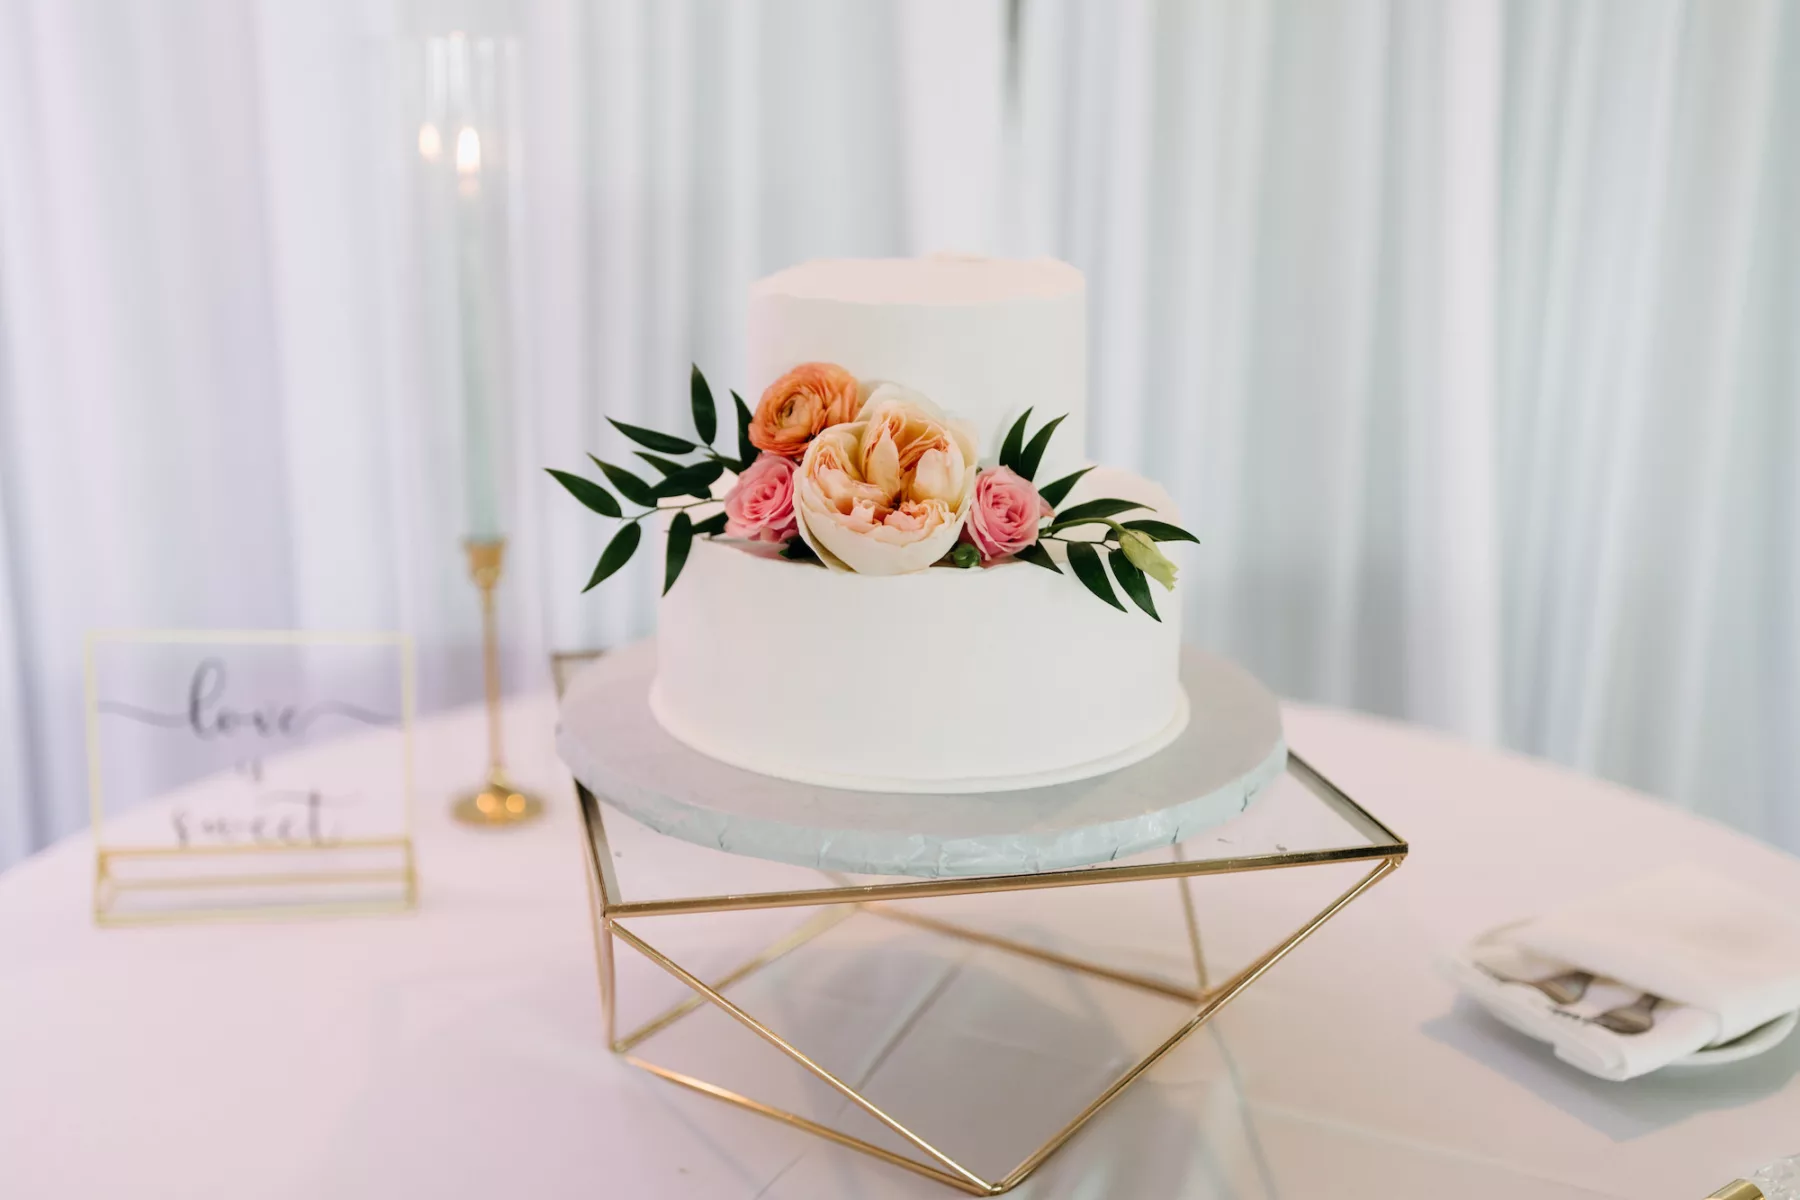 Two-Tiered Round Wedding Cake with Pink Garden Rose, Orange Ranunculus, And Greenery Accents on Geometric Cake Stand Ideas